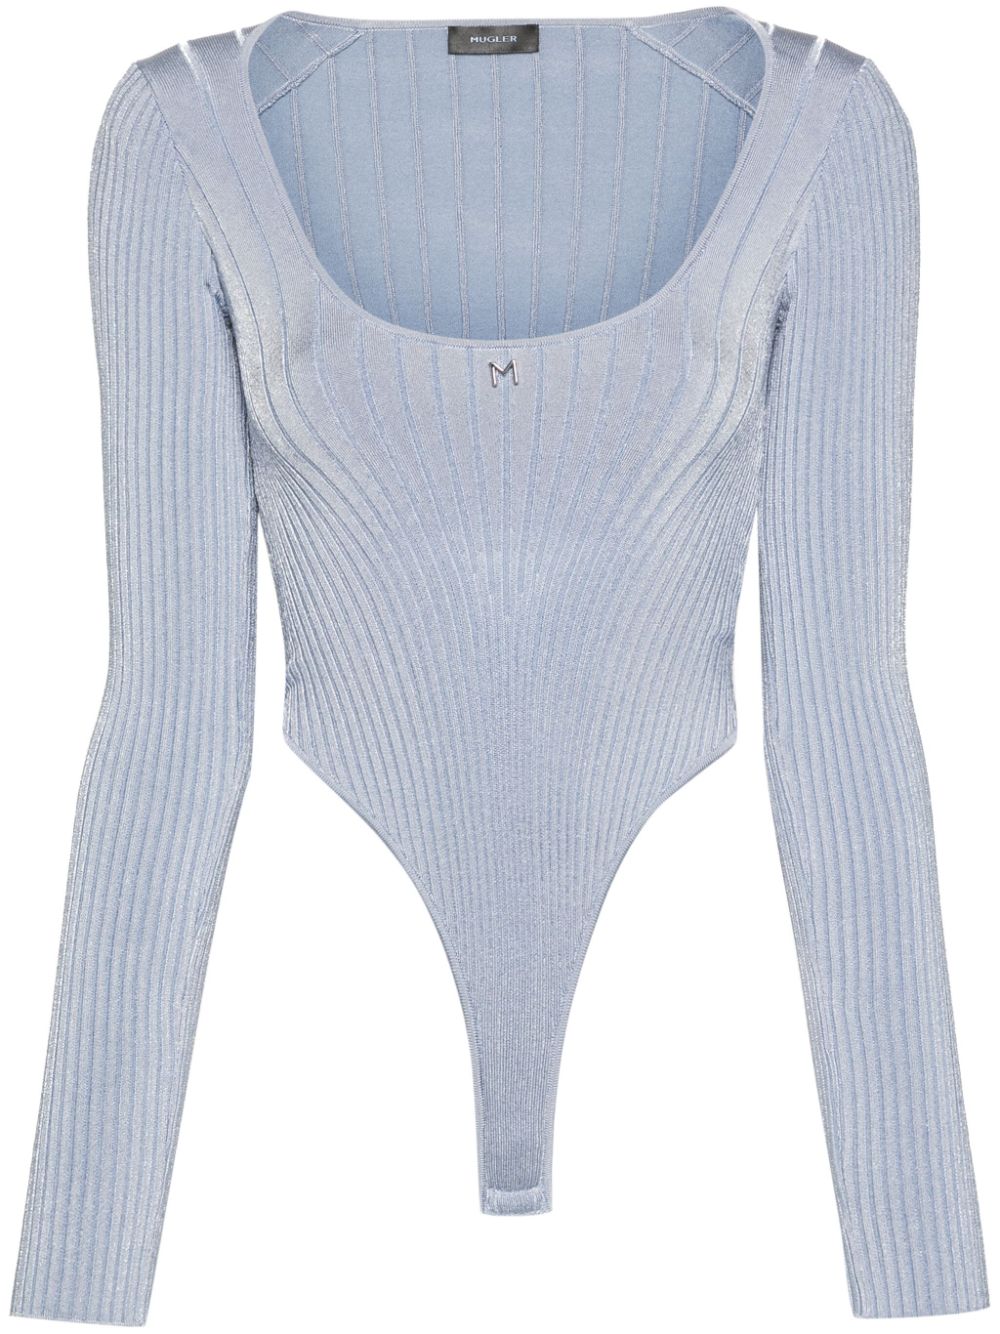 M-plaque knitted bodysuit